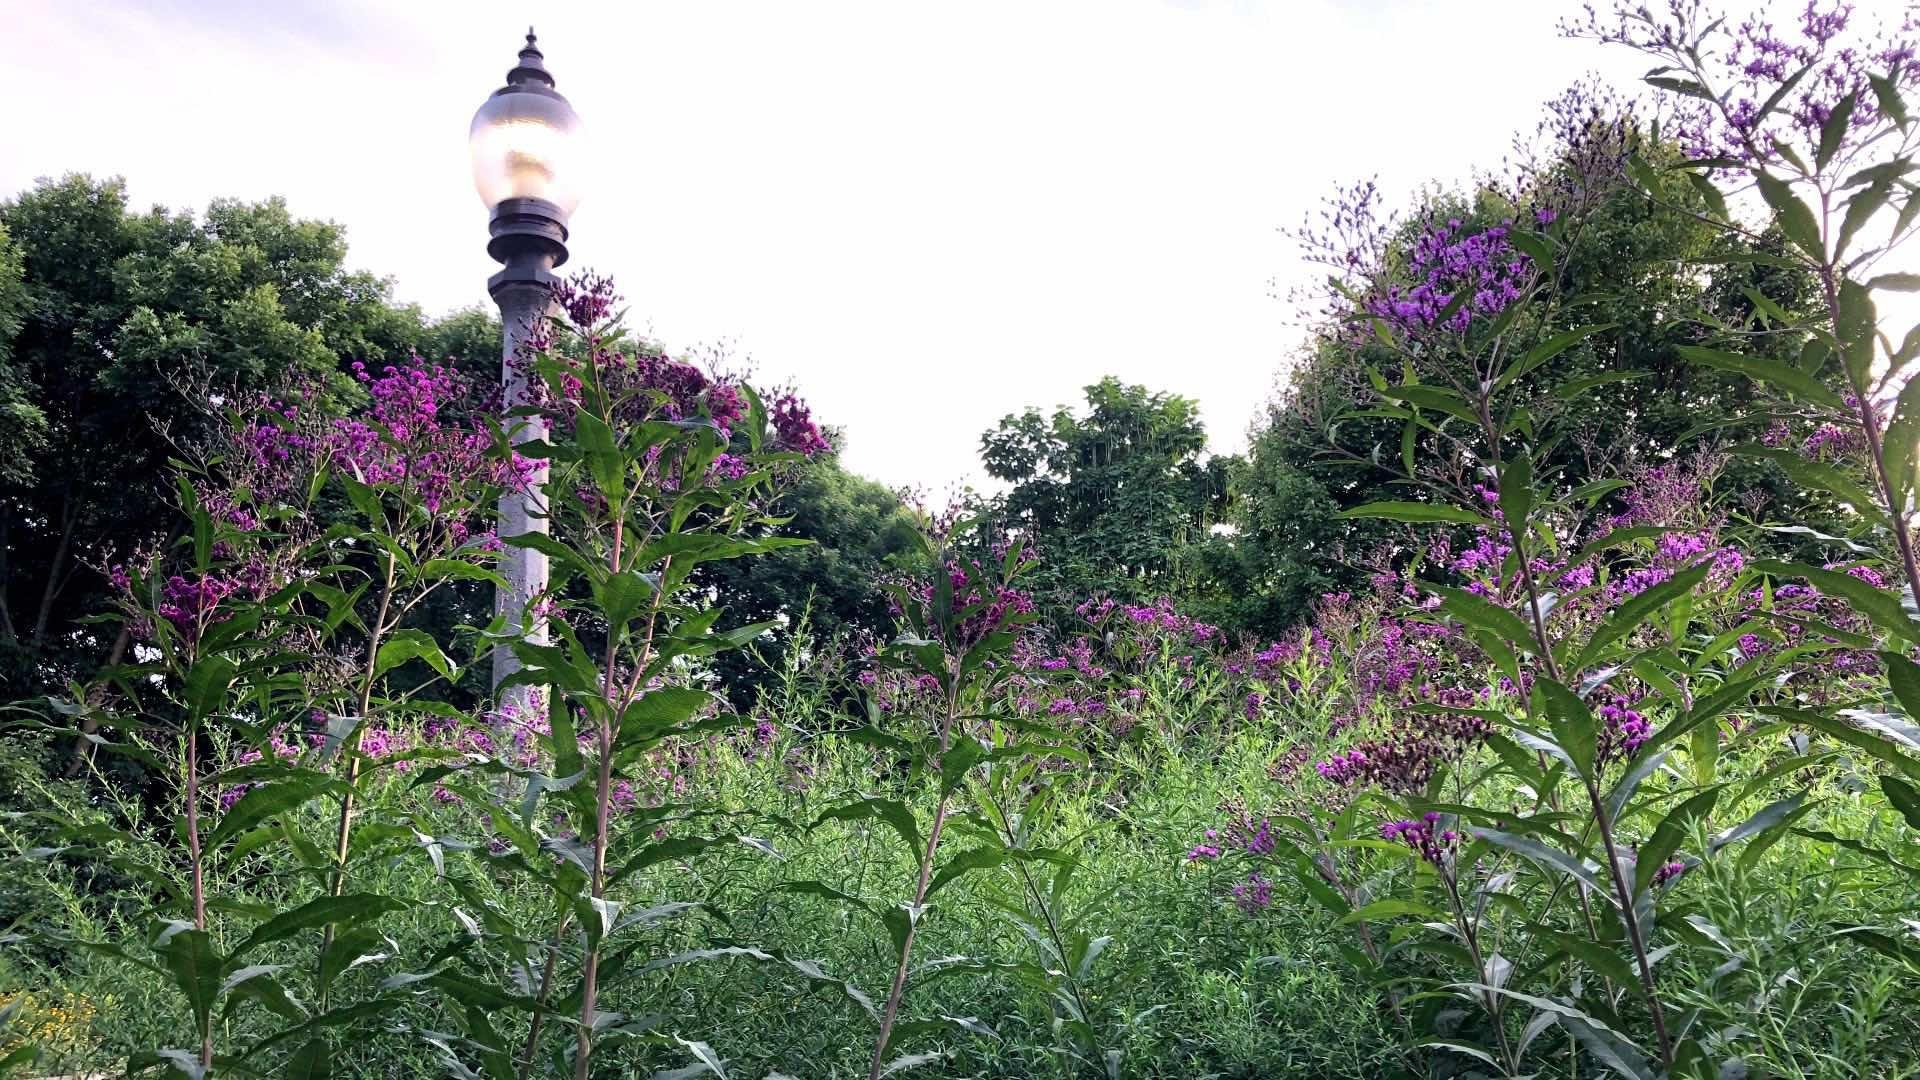 Ironweed can reach 10 to 12 feet, crowned with intensely colored blooms. Seen at Winnemac Park in Lincoln Square. (Patty Wetli / WTTW News)